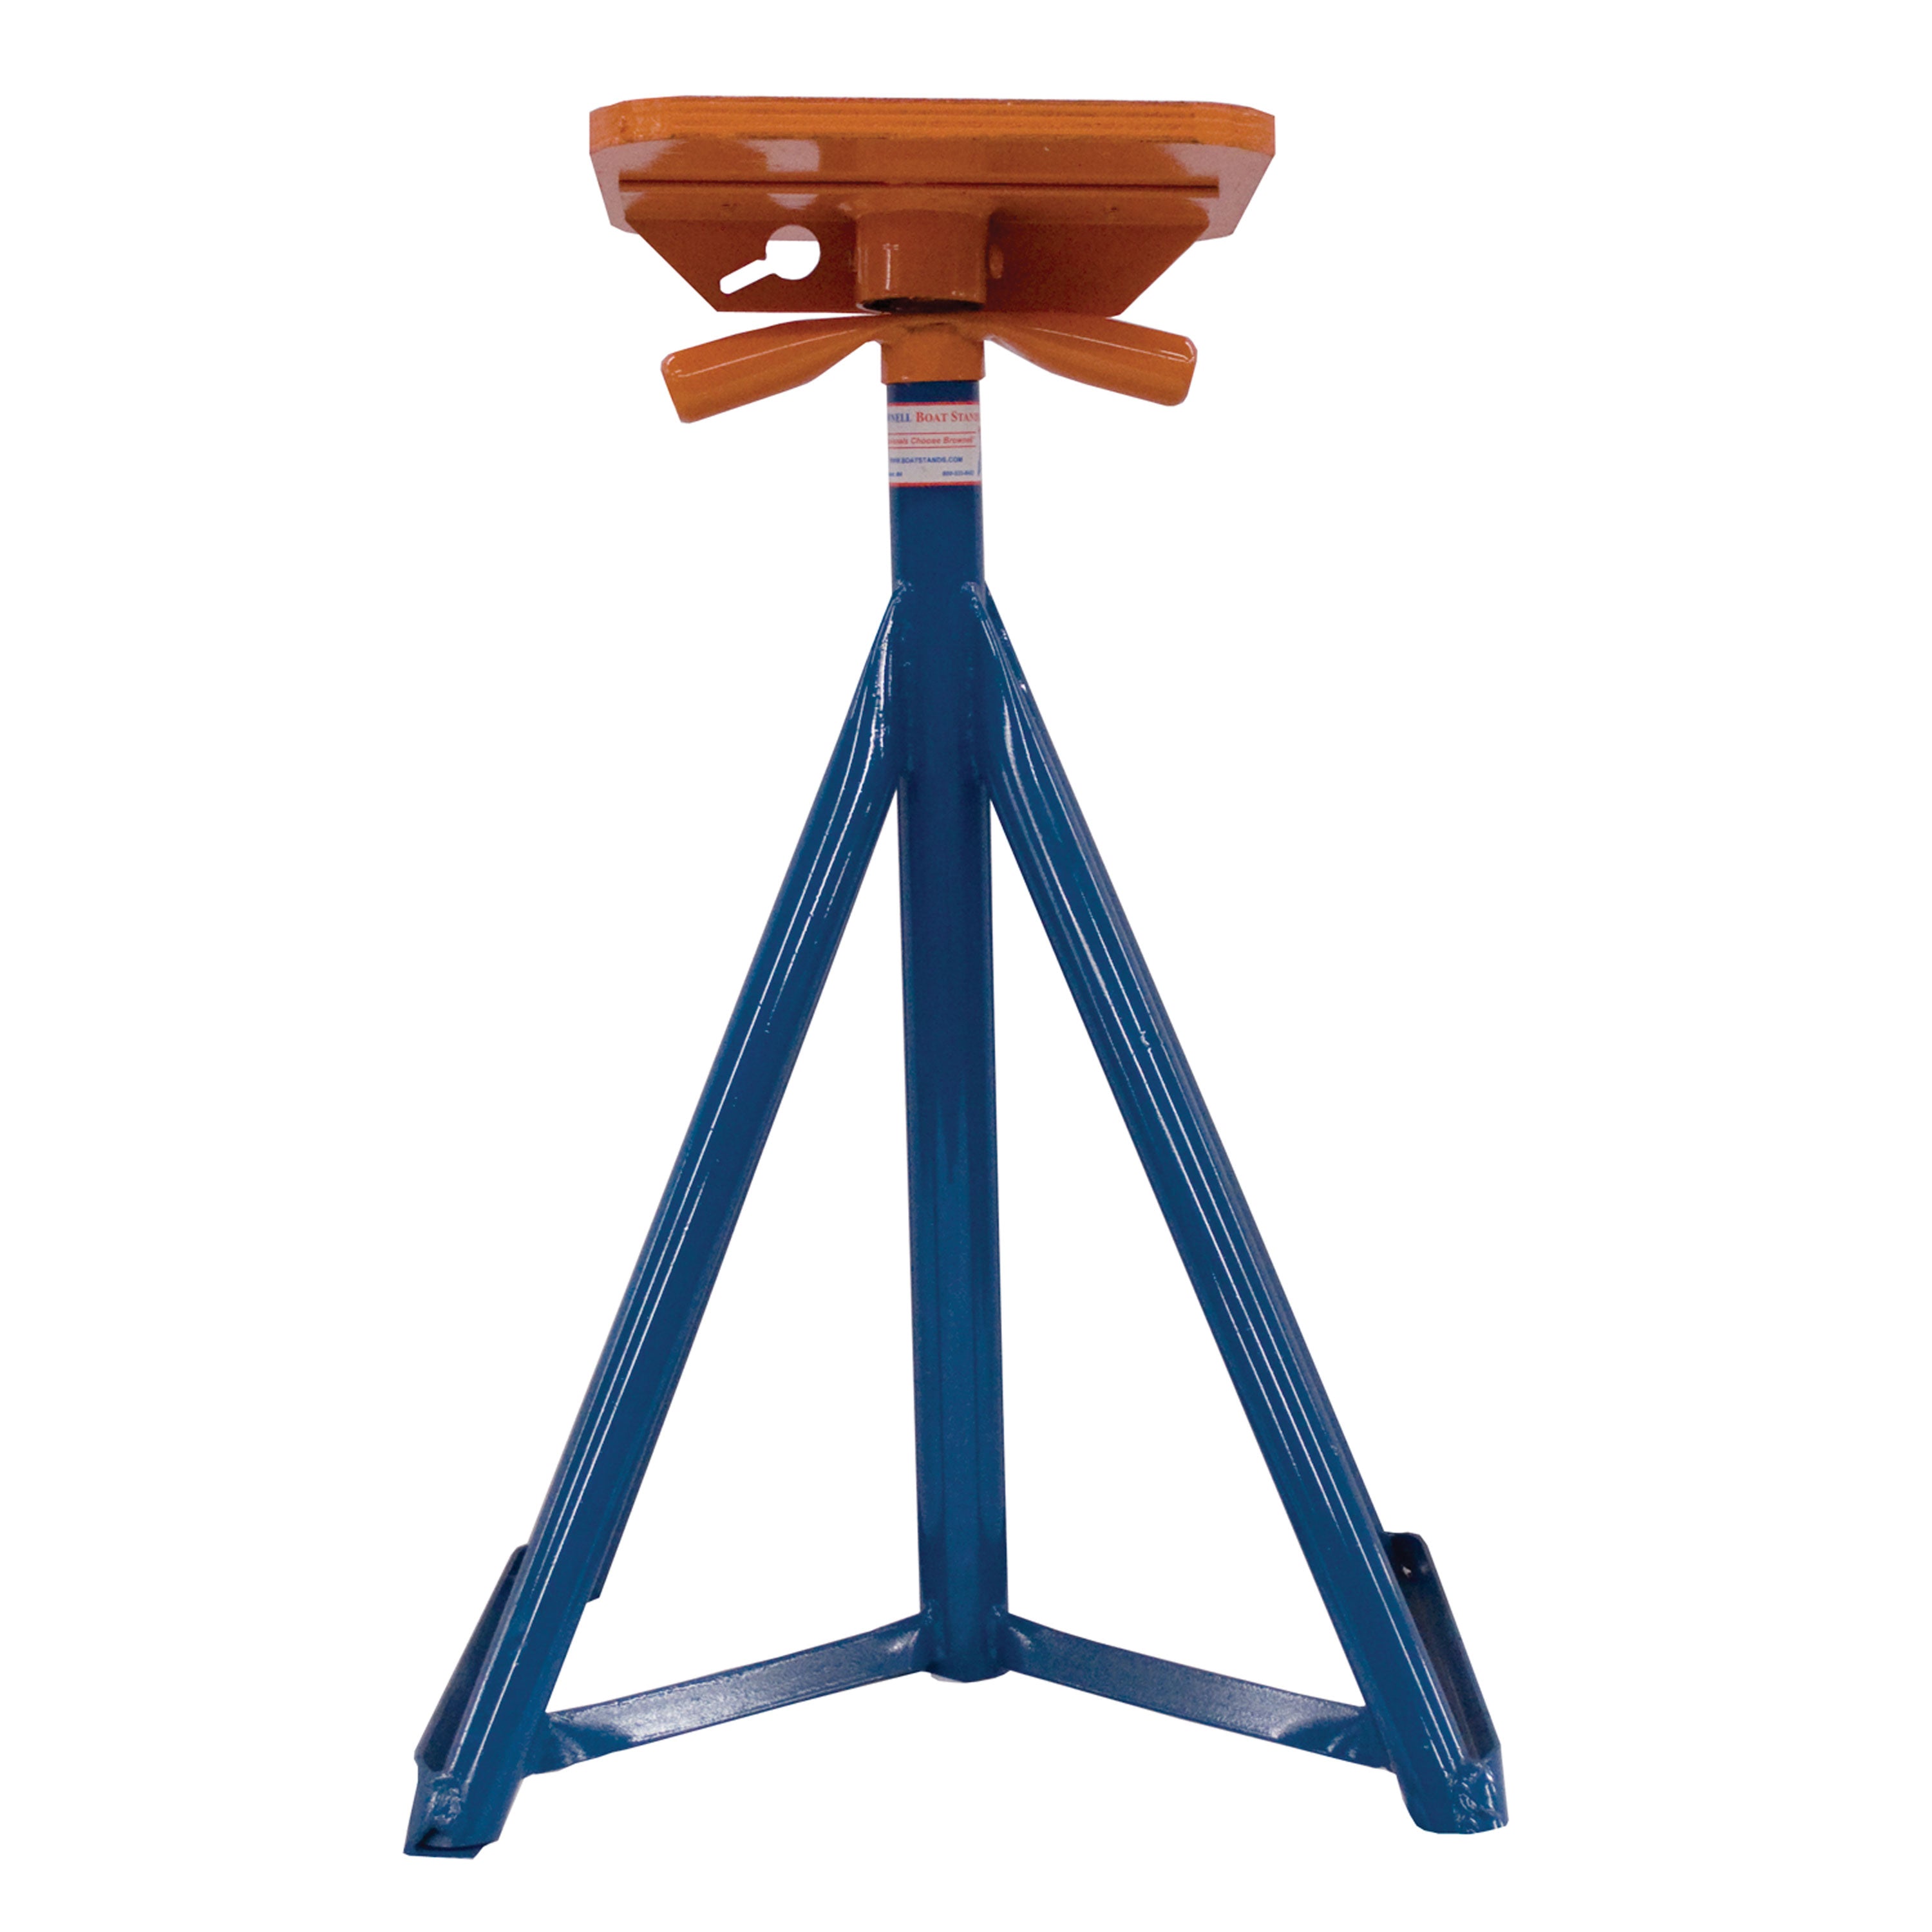 Brownell Boat Stands MB-2 Adjustable Motor Boat Stand - Painted Finish, 29" to 46" (74-117 cm)